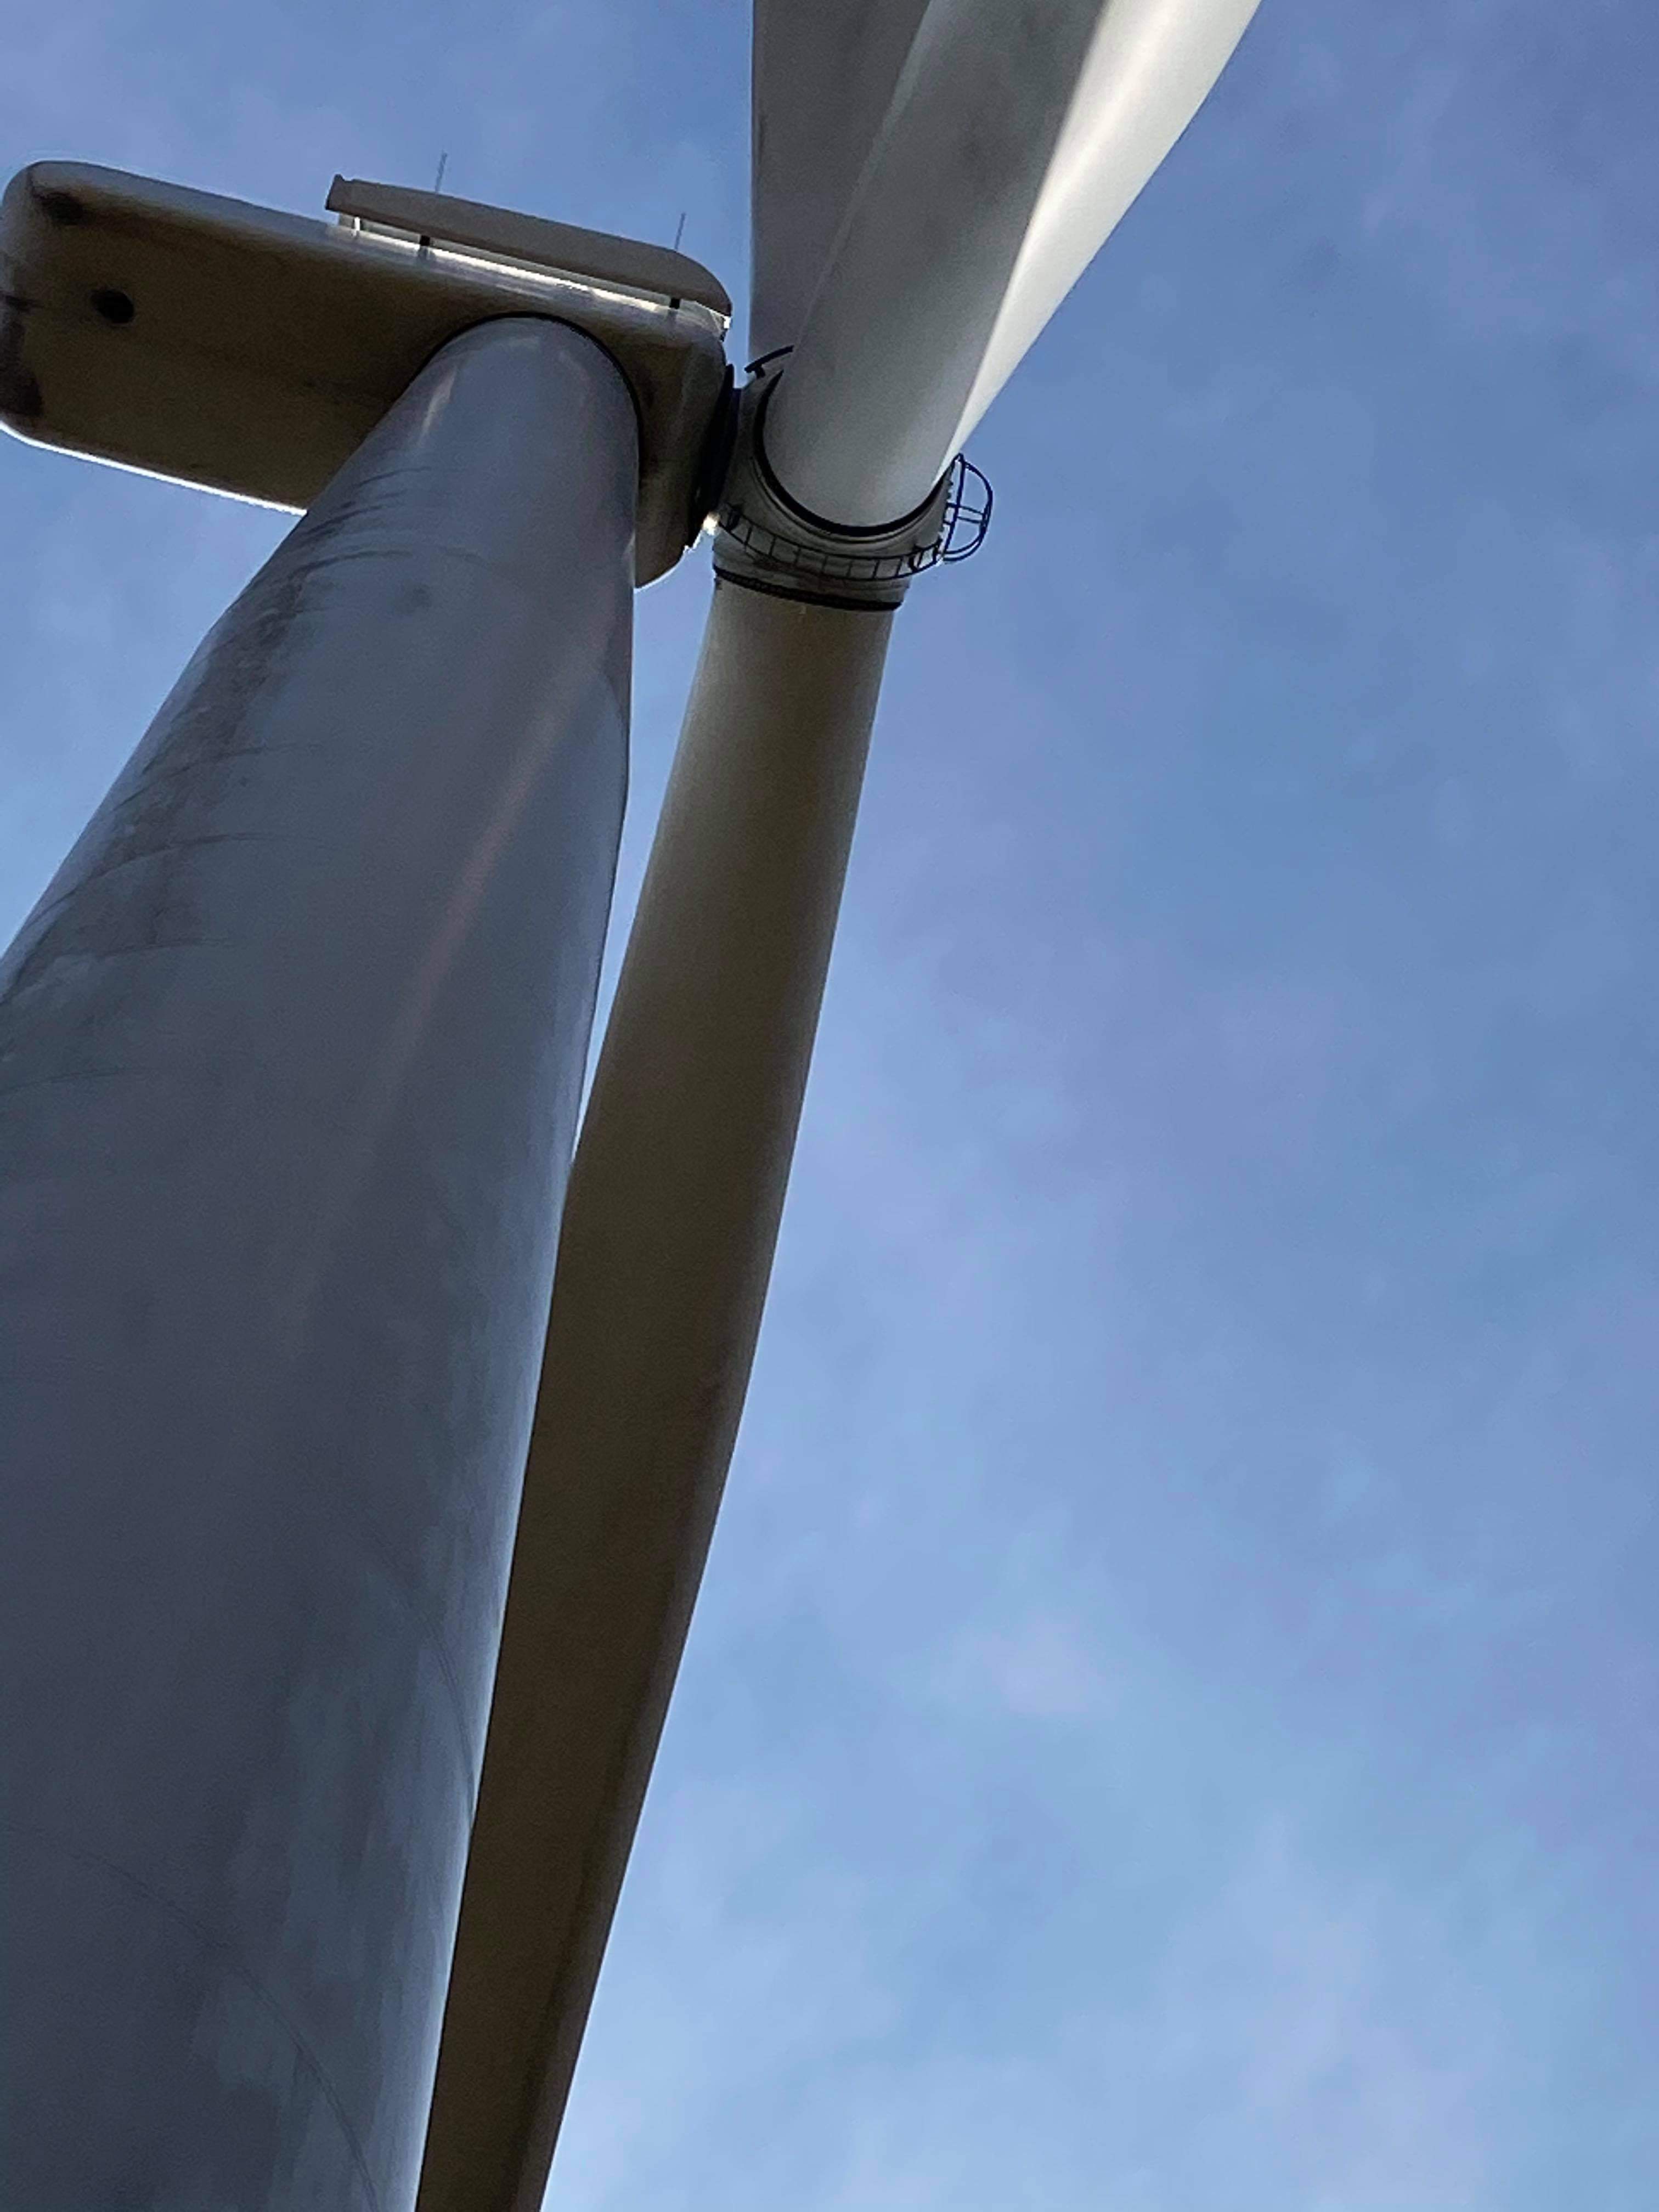 The blades of a wind turbine